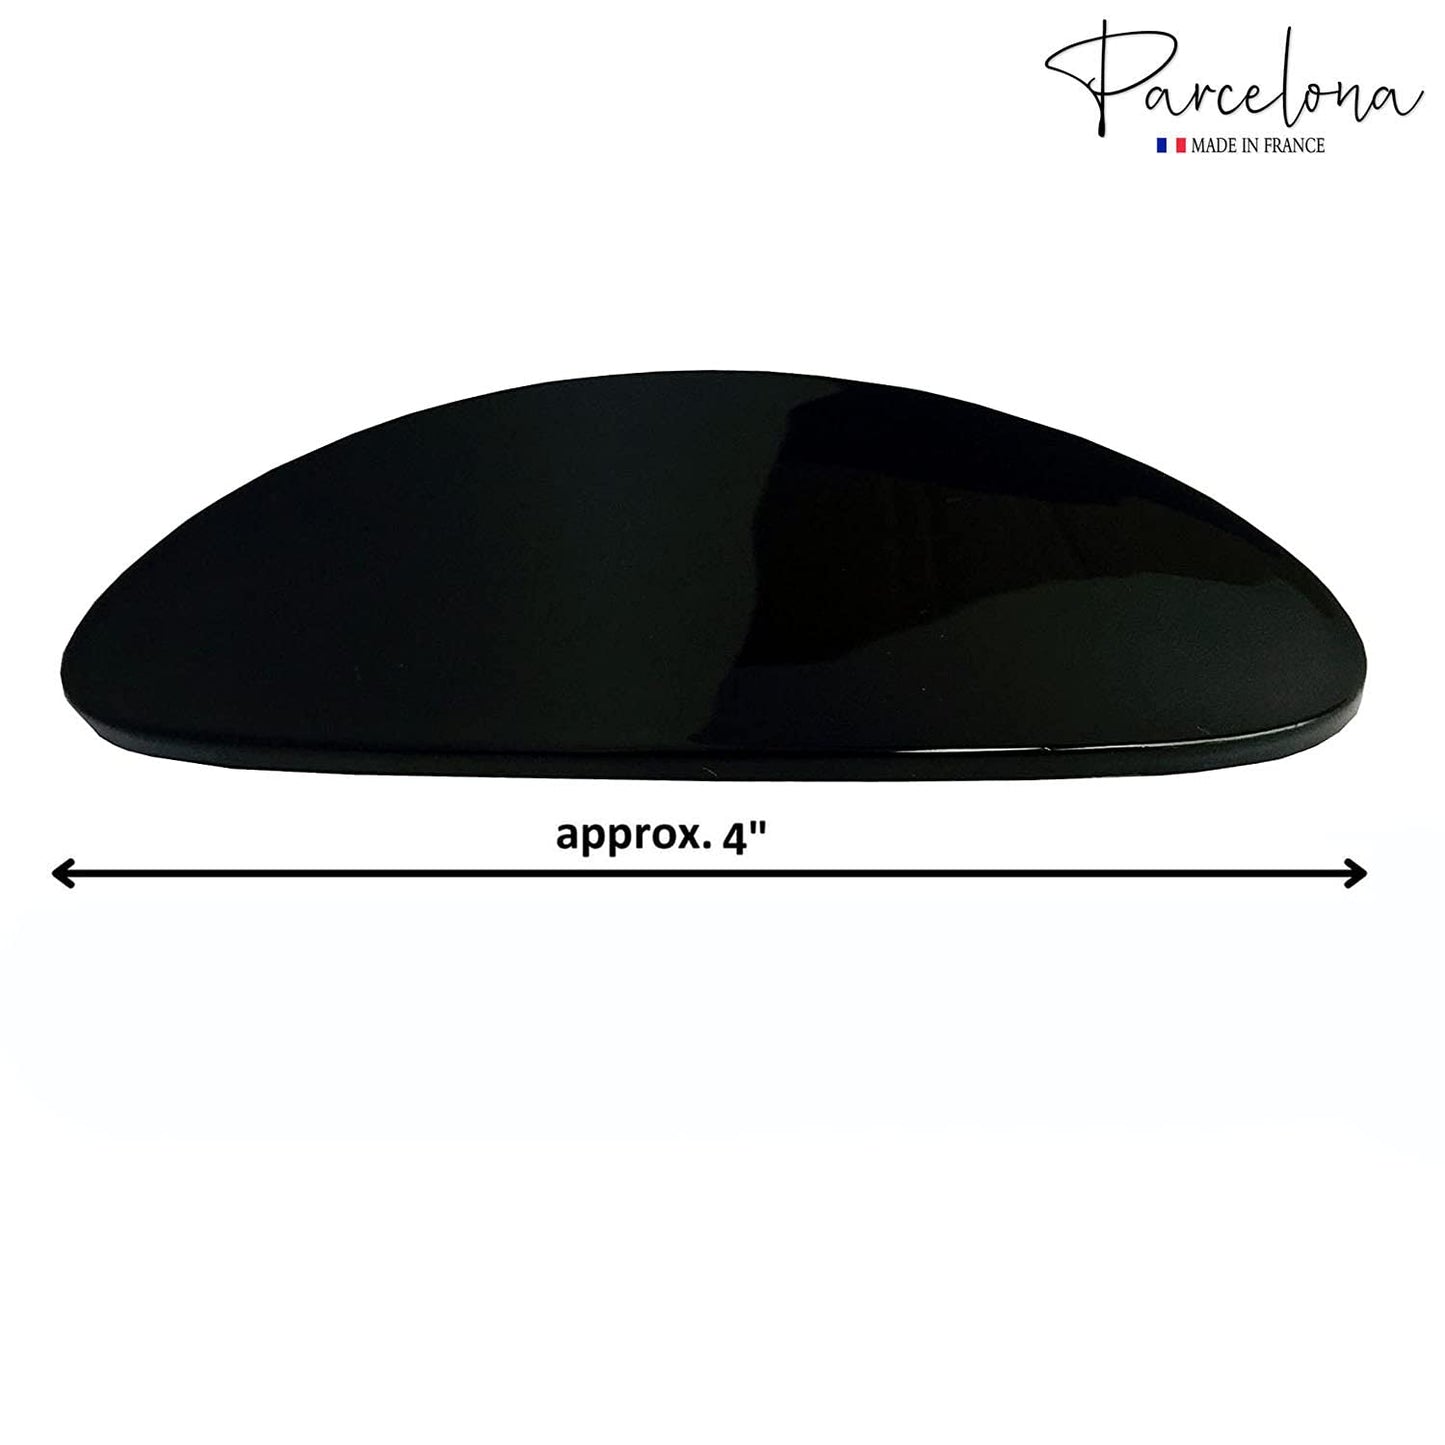 Parcelona French Oval Celluloid Glossy Black Automatic Hair Clip Barrette Hair Clip for Girls Strong Hold No Slip Durable Women Hair Accessories, Made in France - (Black)